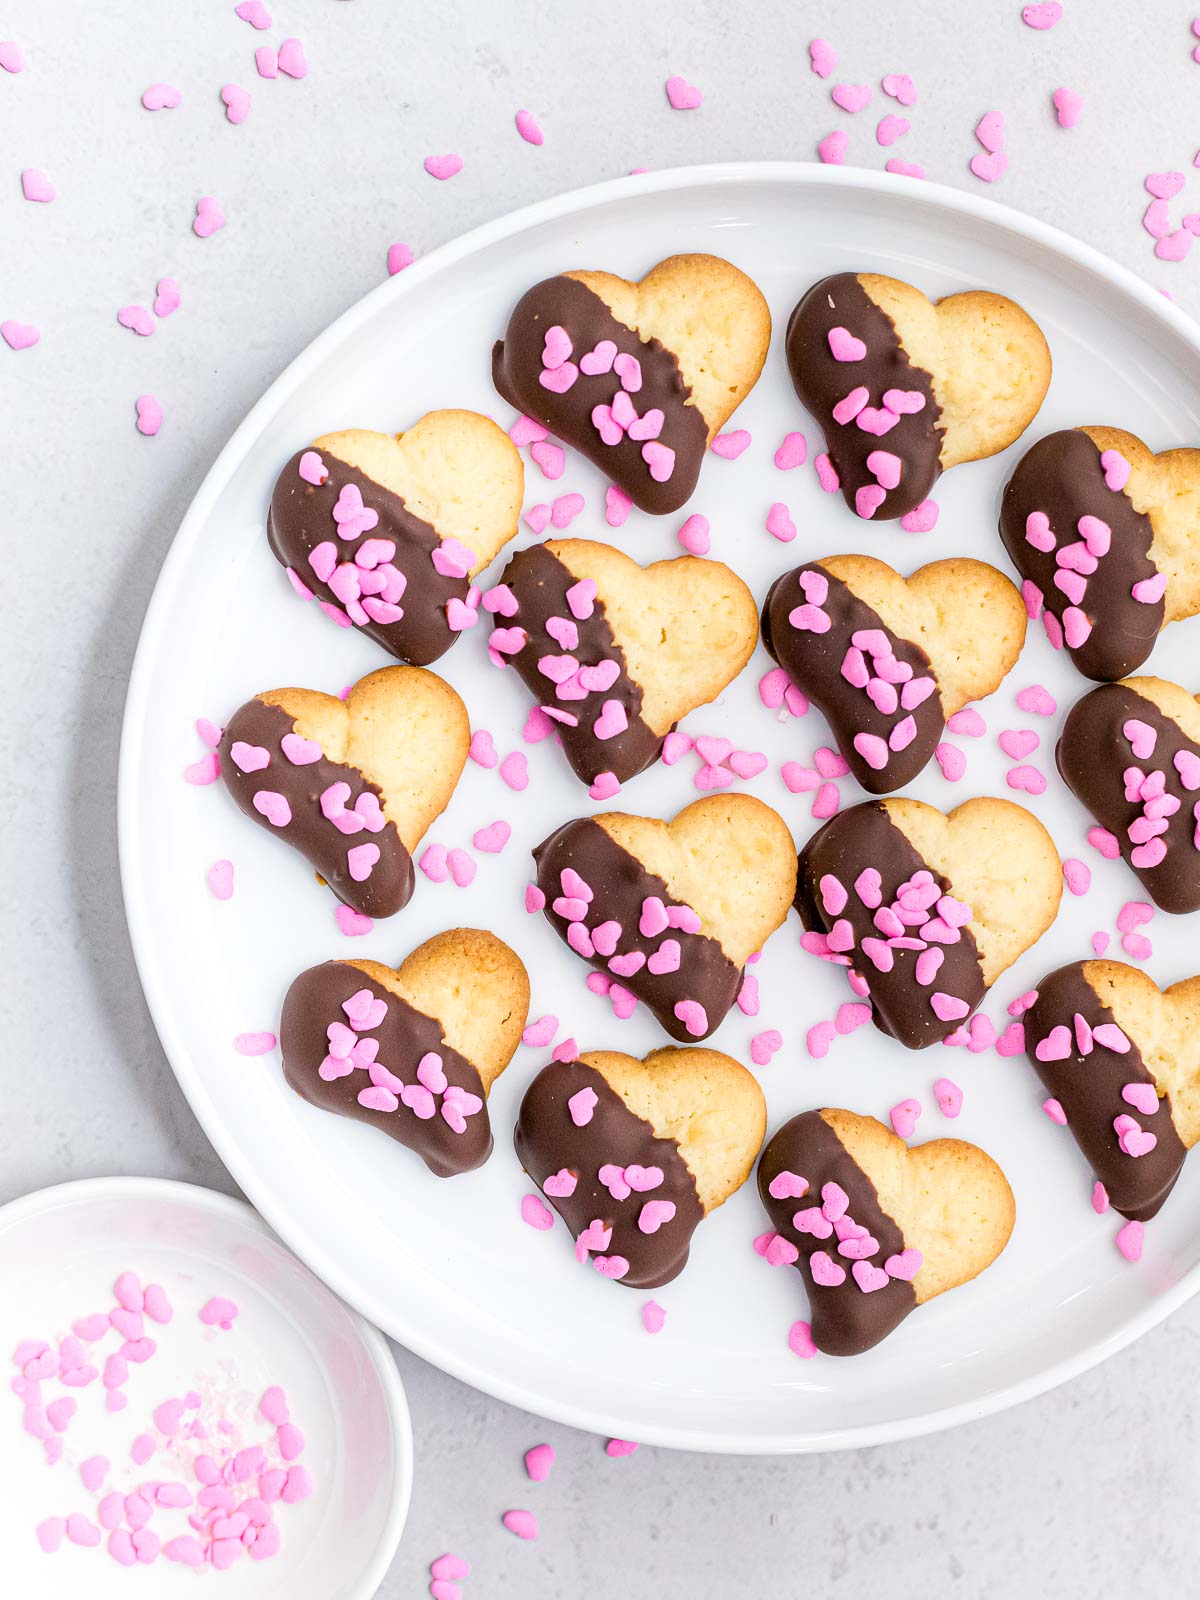 Valentines spritz cookies dipped in melted dark chocolate and decorated with pink heart shaped sprinkles